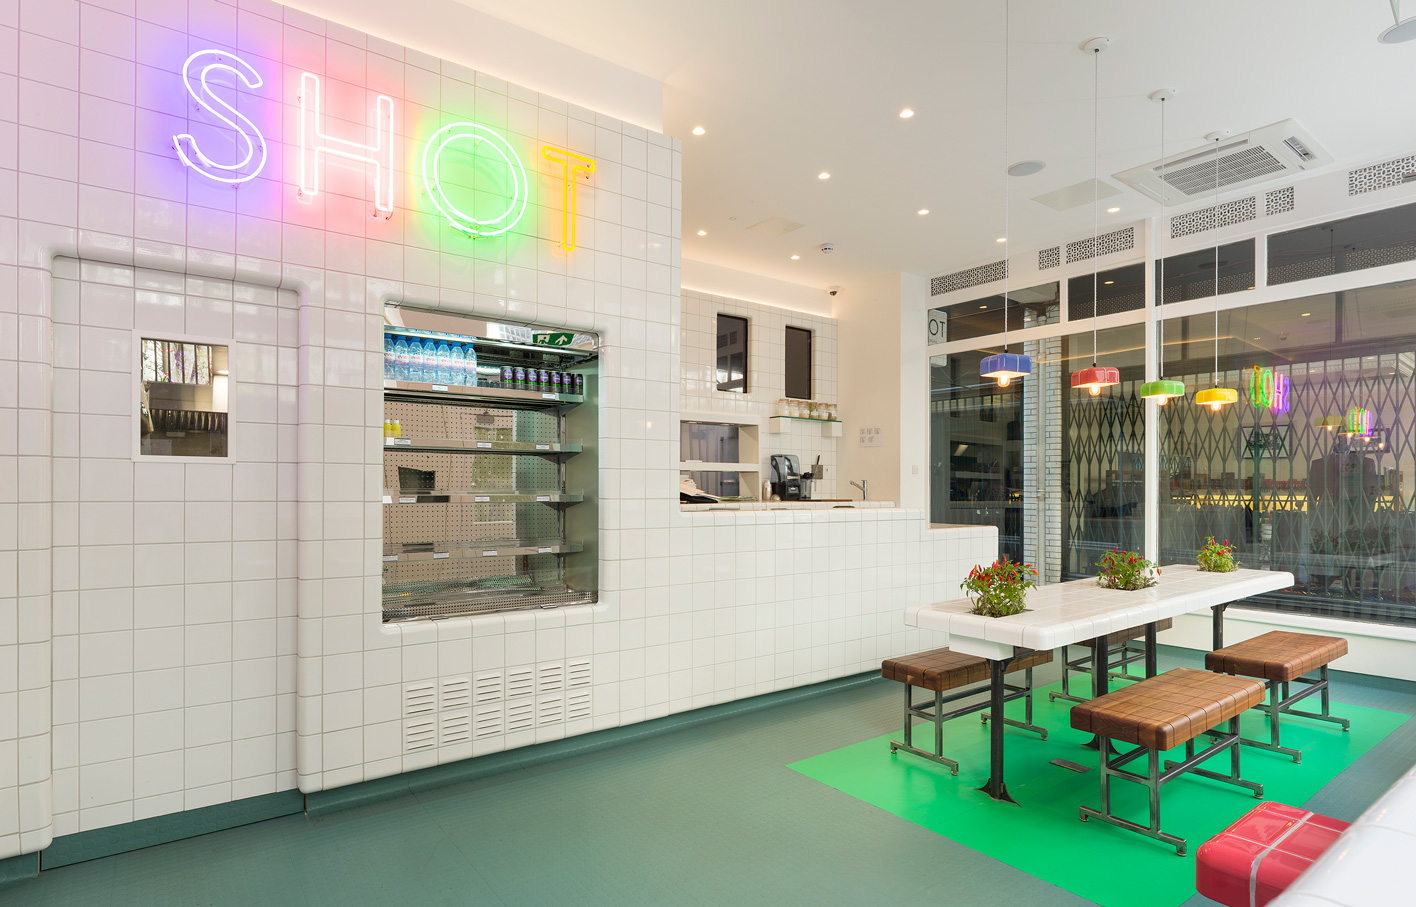 Aldworth James & Bond | SHOT - a healthy lunch spot and juice bar in the City